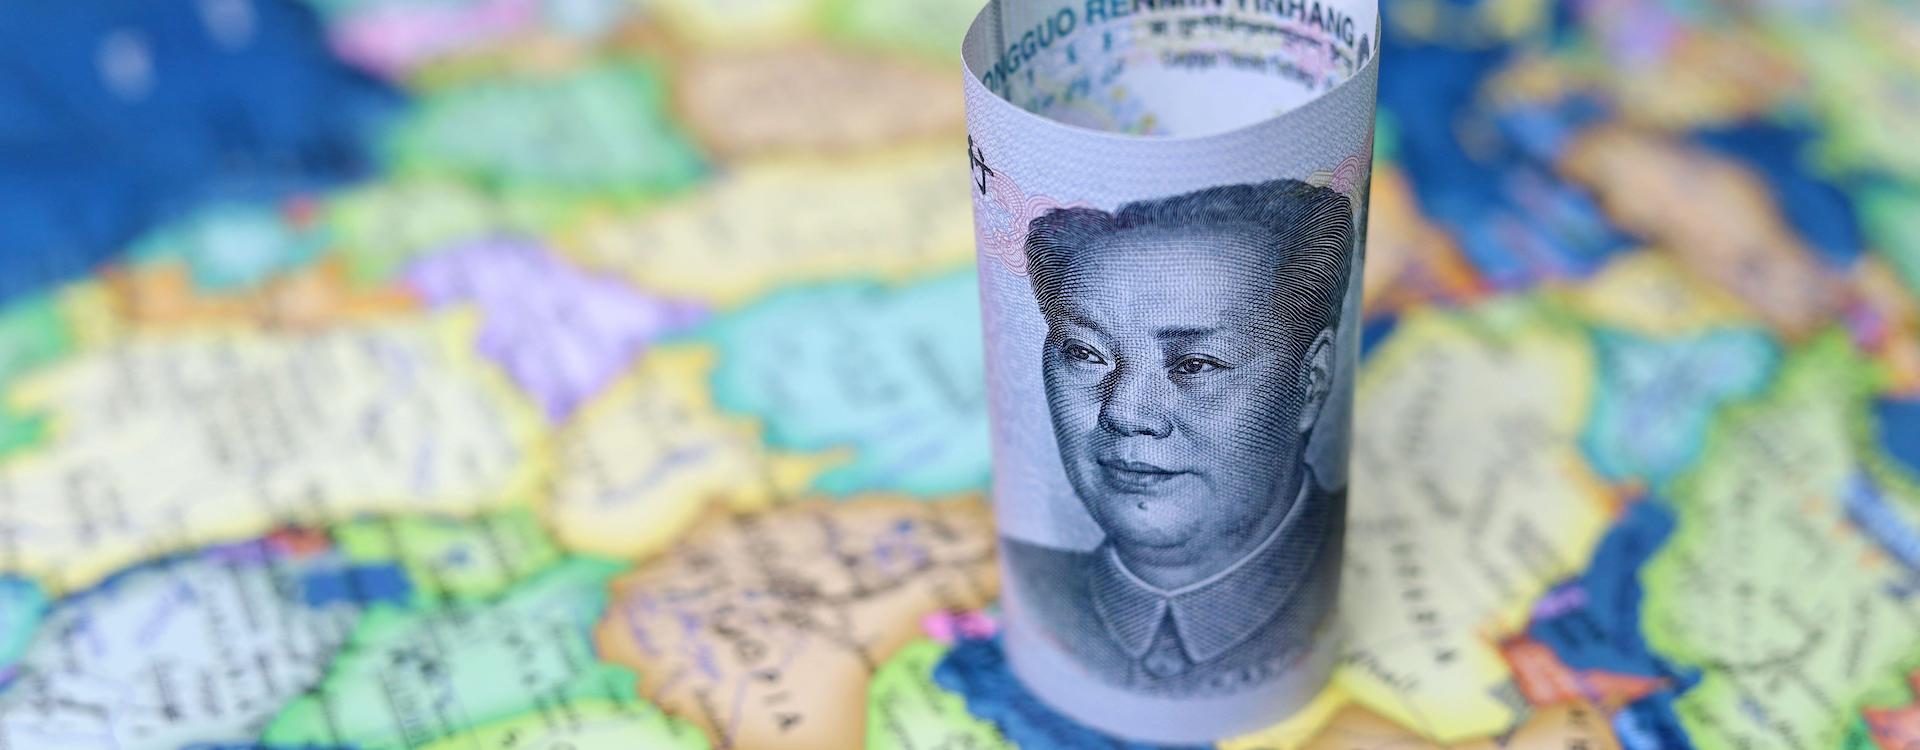 China’s overseas lending and debt sustainability in Africa - Seen through the lens of the FOCAC